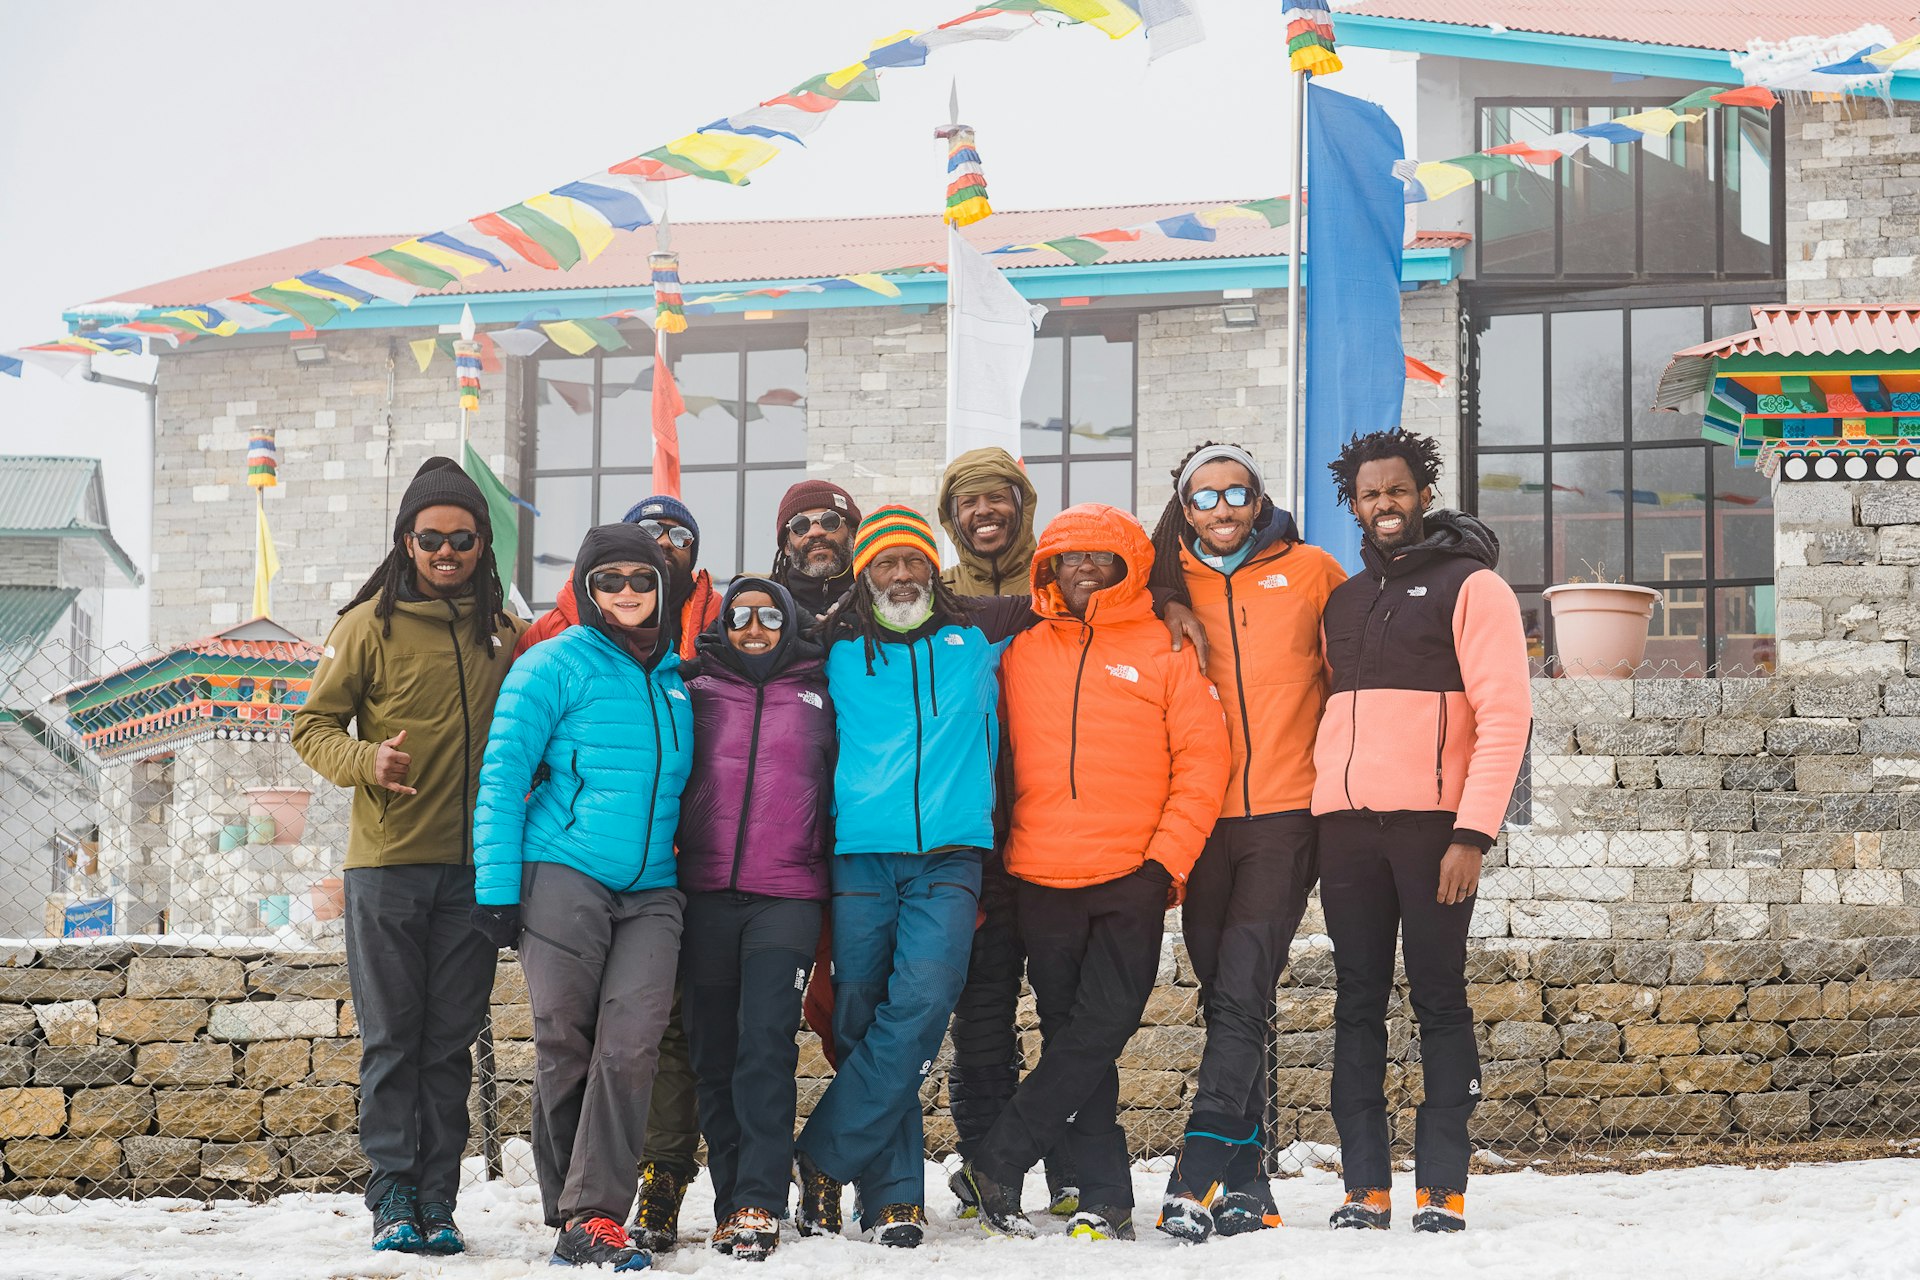 The Full Circle Everest team poses outside on a snowy day during a training trip to Nepal